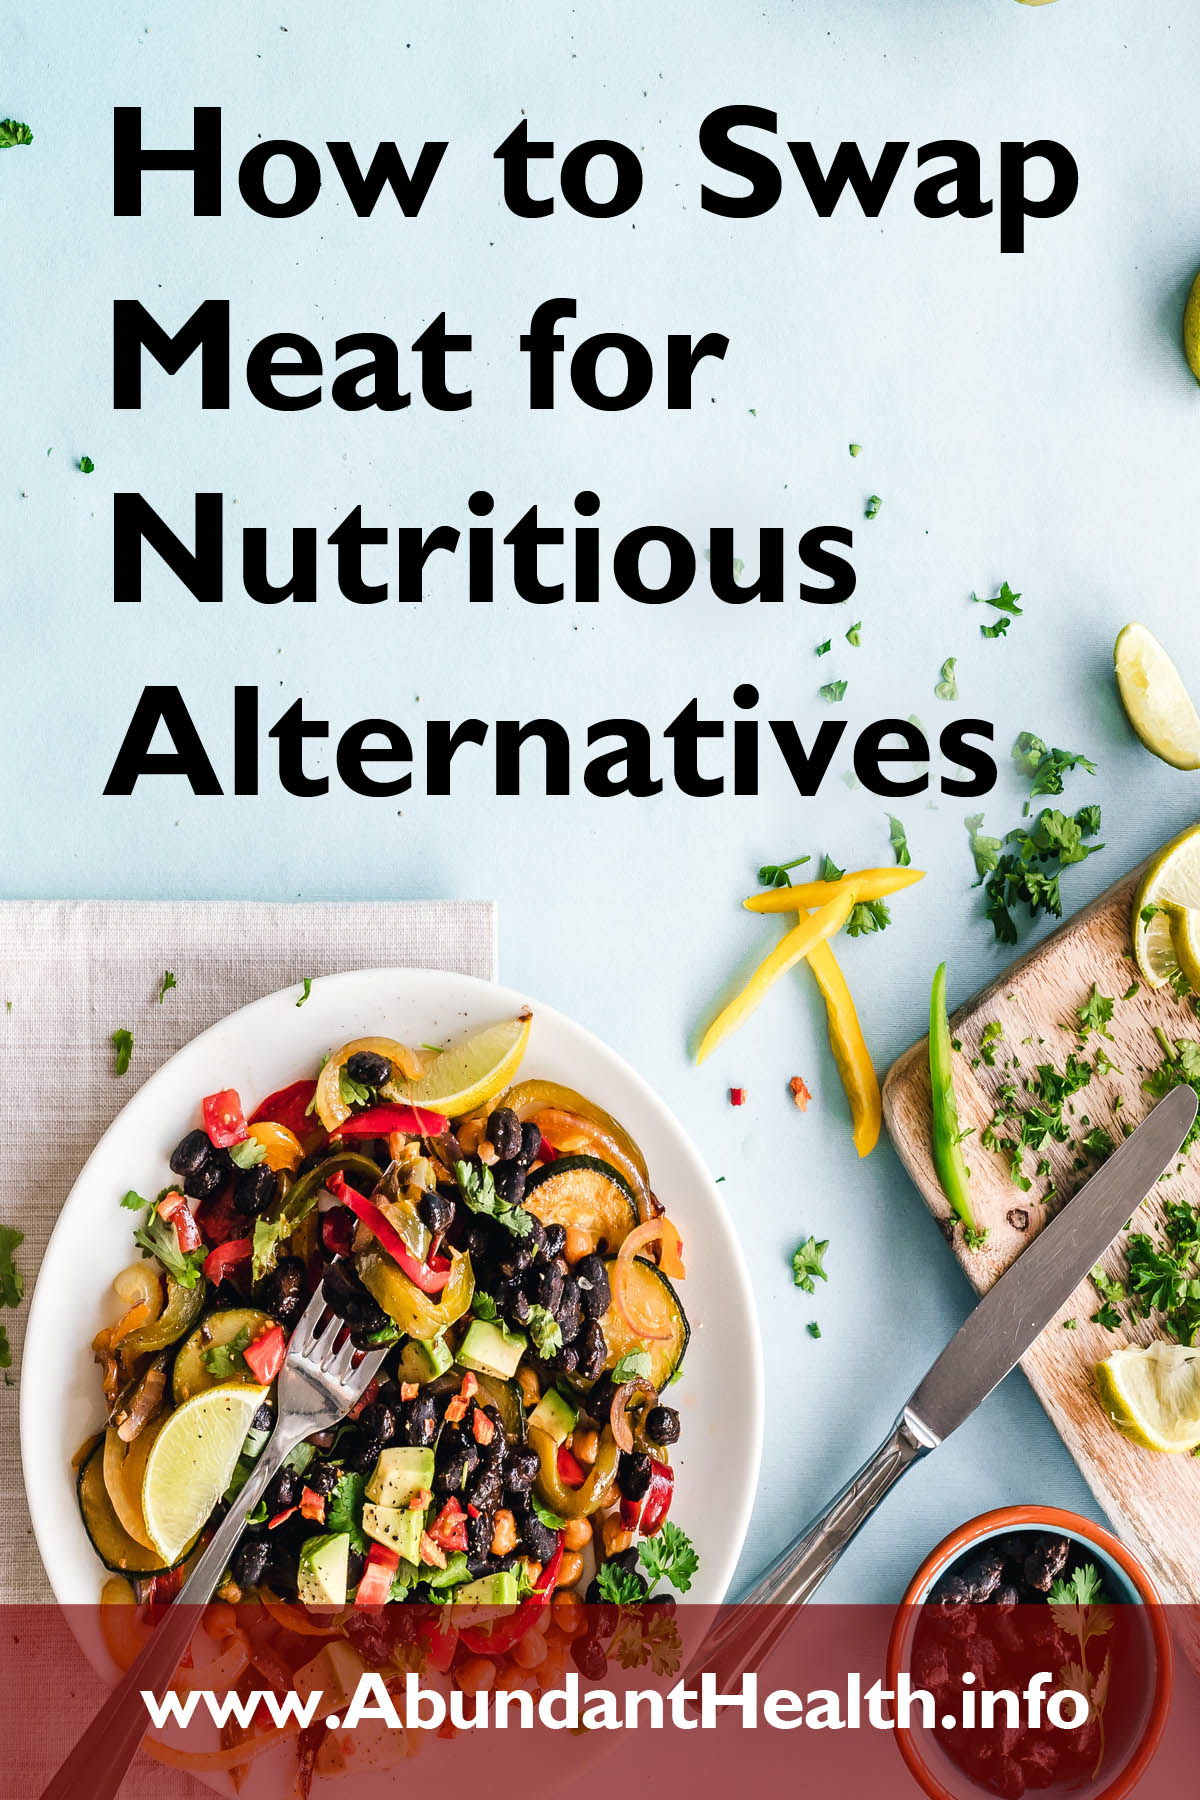 How to Swap Meat for Nutritious Alternatives